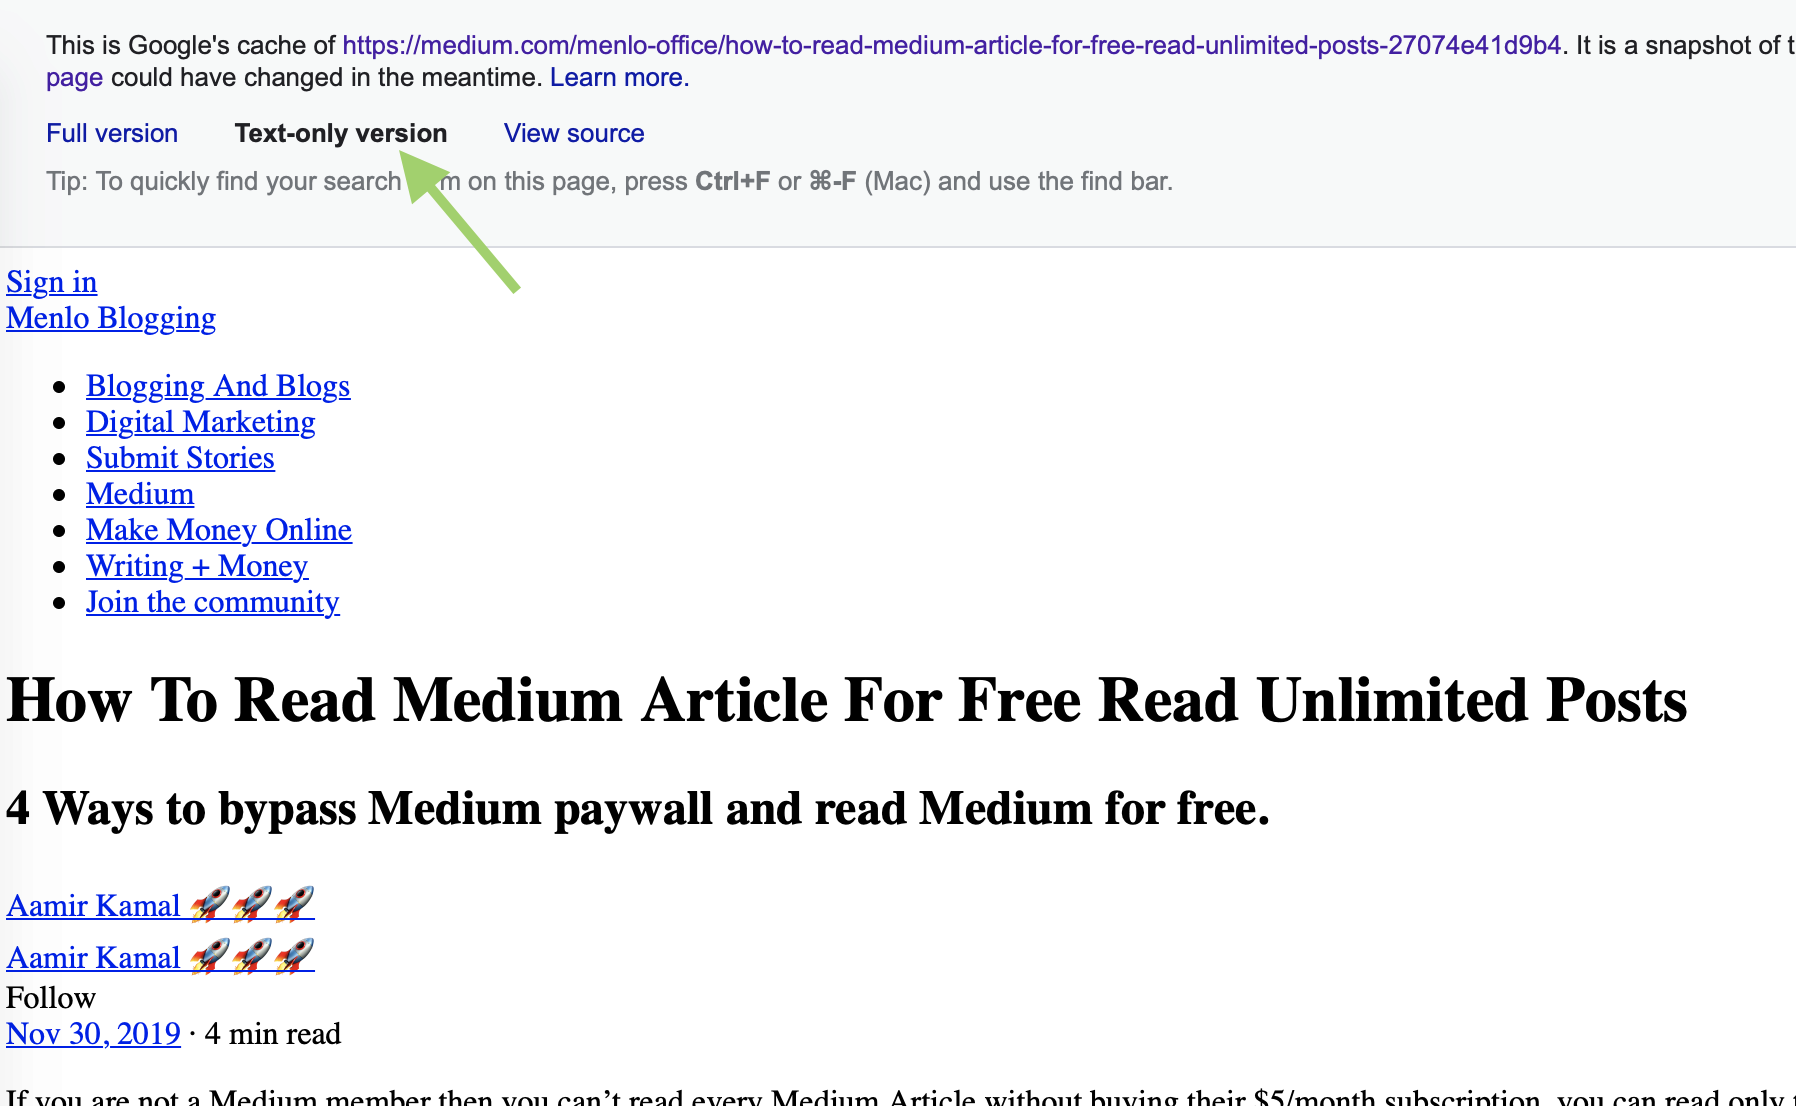 How to read medium articles for free text only